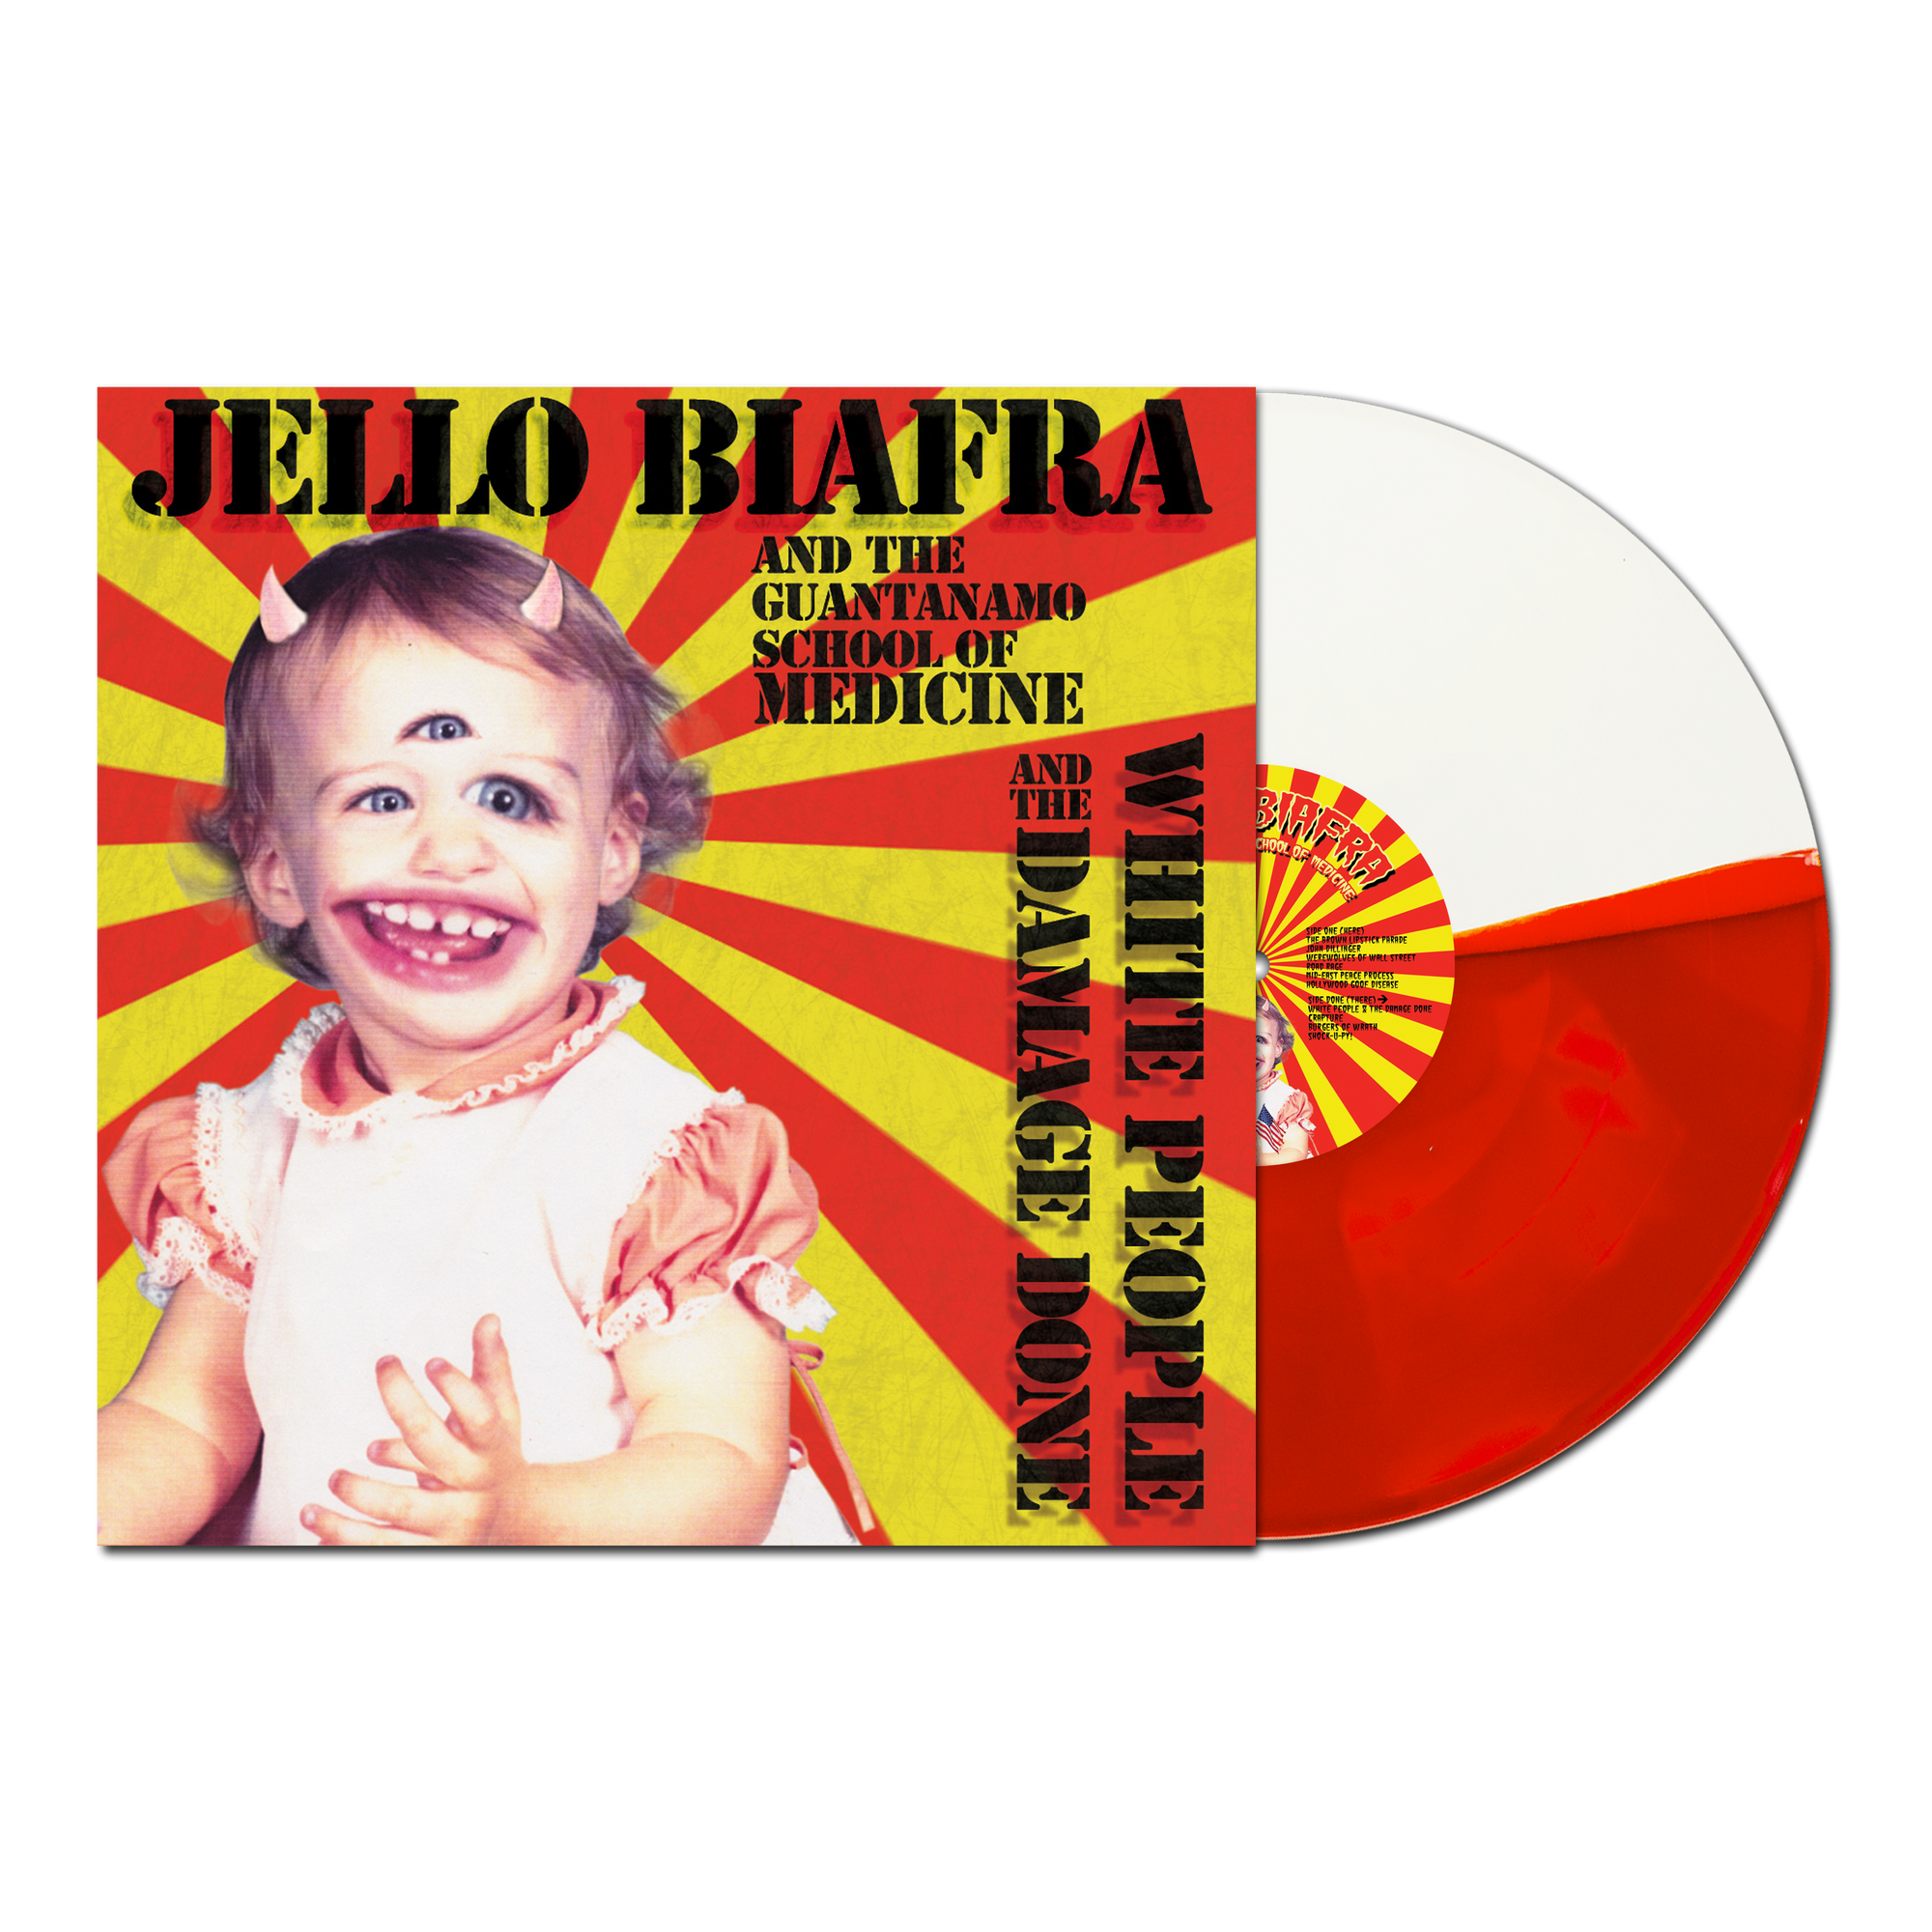 v450 - Jello Biafra And The Guantanamo School Of Medicine - "White People And The Damage Done" - Pre-Order